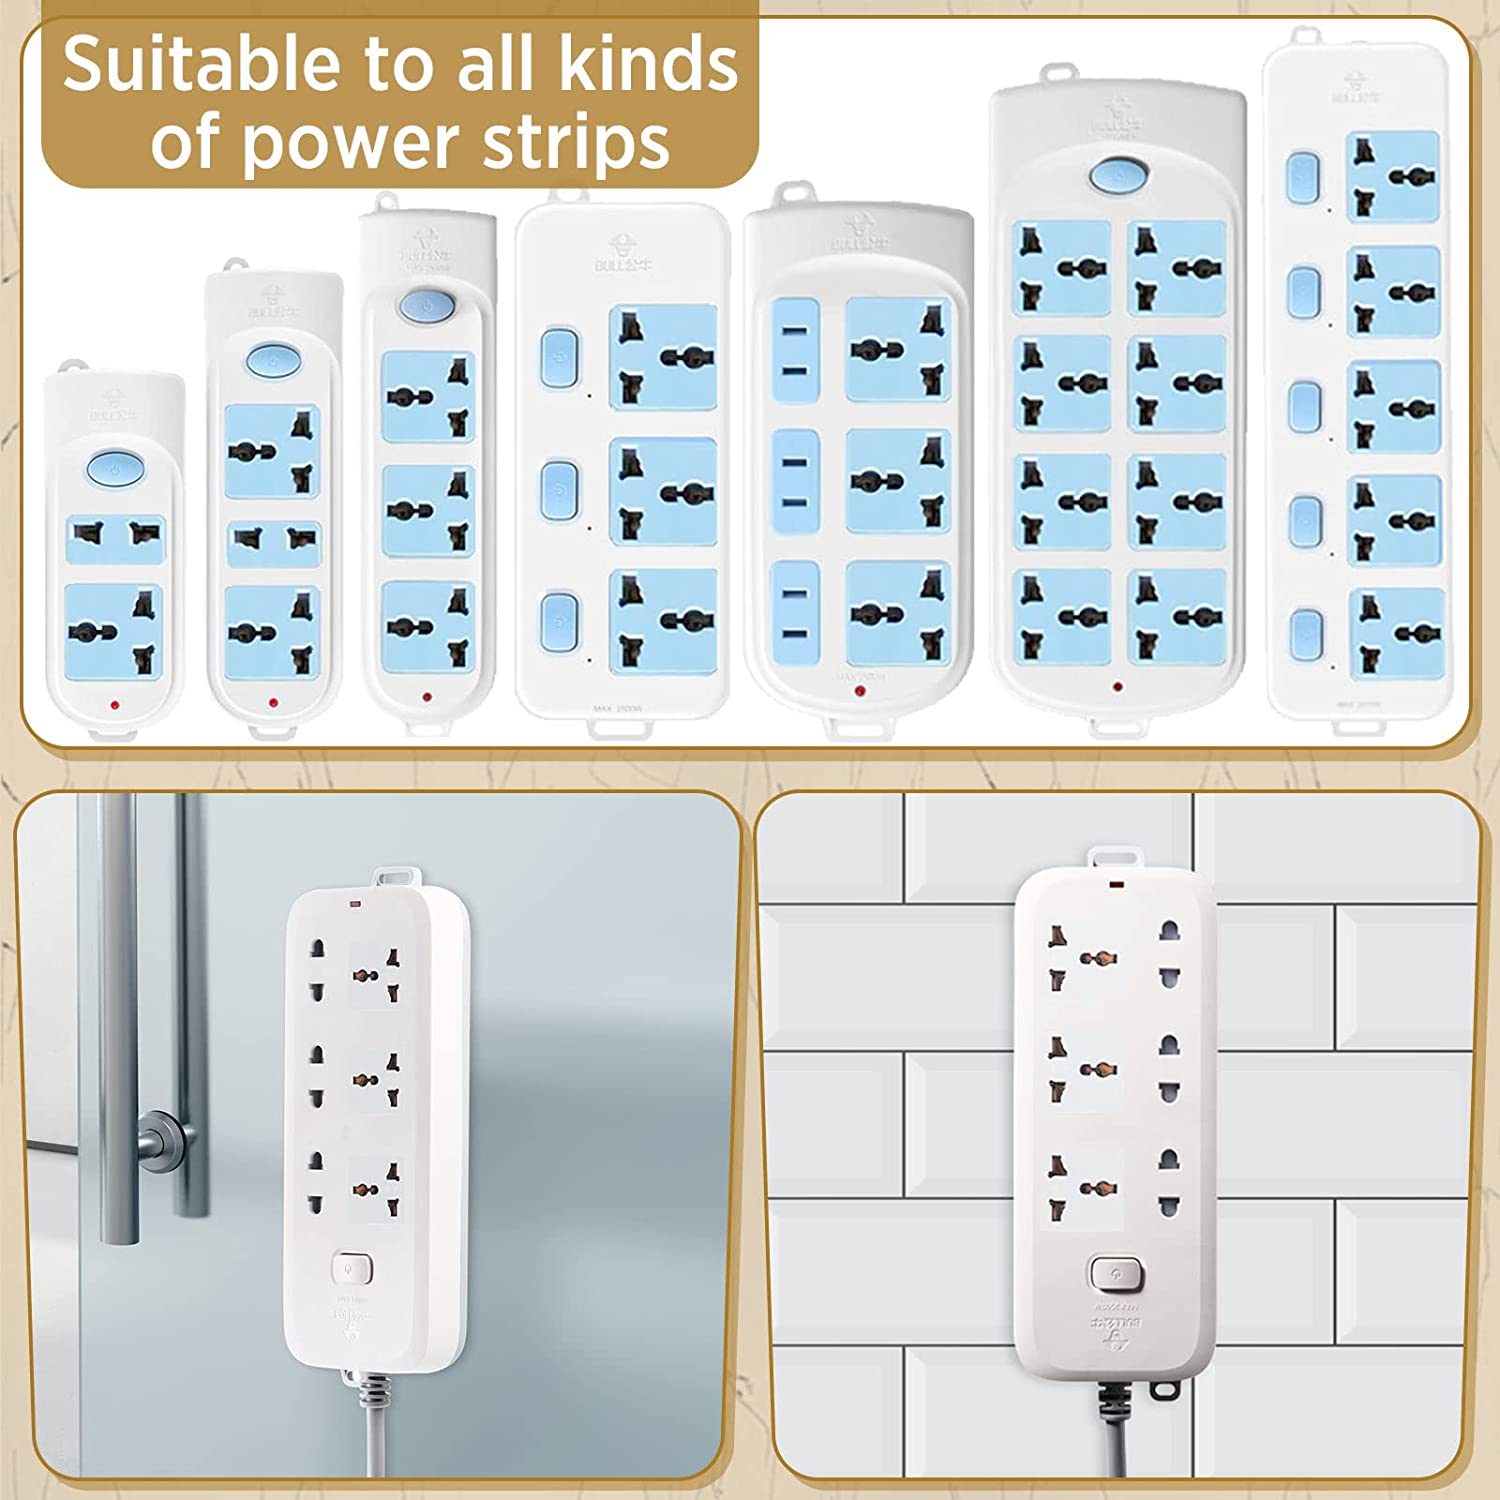 Powerboards-and-Adapters-Self-Adhesive-Power-Strip-Holder-No-Drill-Extension-Block-Wall-Mount-Fixator-Easy-to-Install-Sliding-Design-Attaches-to-Wood-Plastic-Metal-Ceramic-28